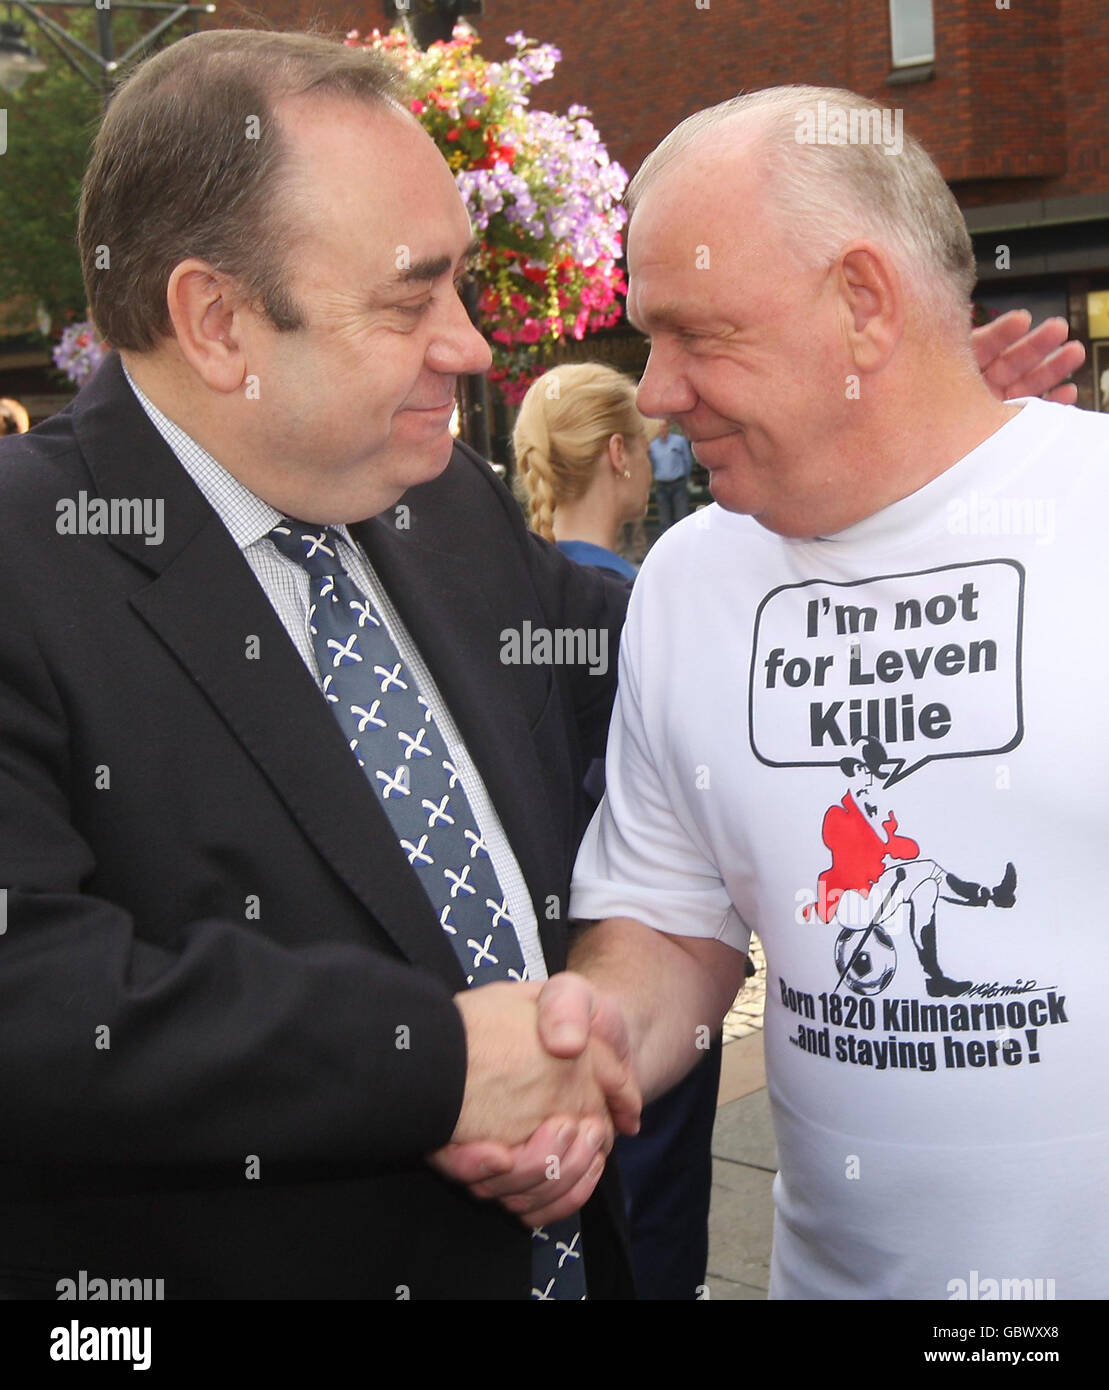 First Minister Alex Salmond (left) meets Billy Paterson, who has worked at the Johnnie Walker bottling plant in Kilmarnock for 44 years - making him the longest serving member of staff, during a visit to Kilmarnock to sign a petition to save Diageo jobs. Stock Photo